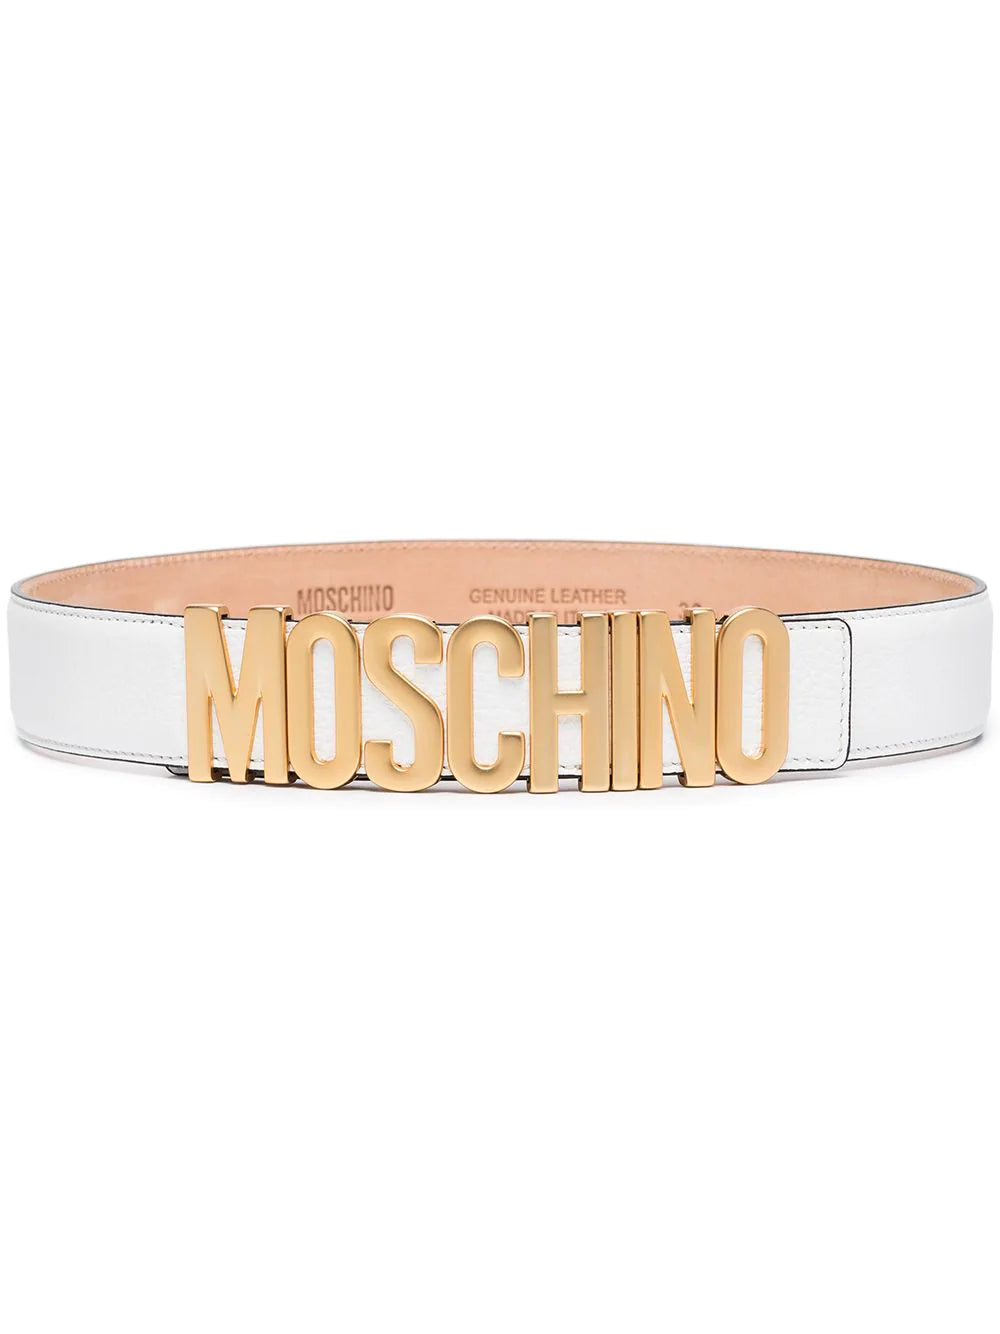 Moschino White Belt with Gold Logo Letters